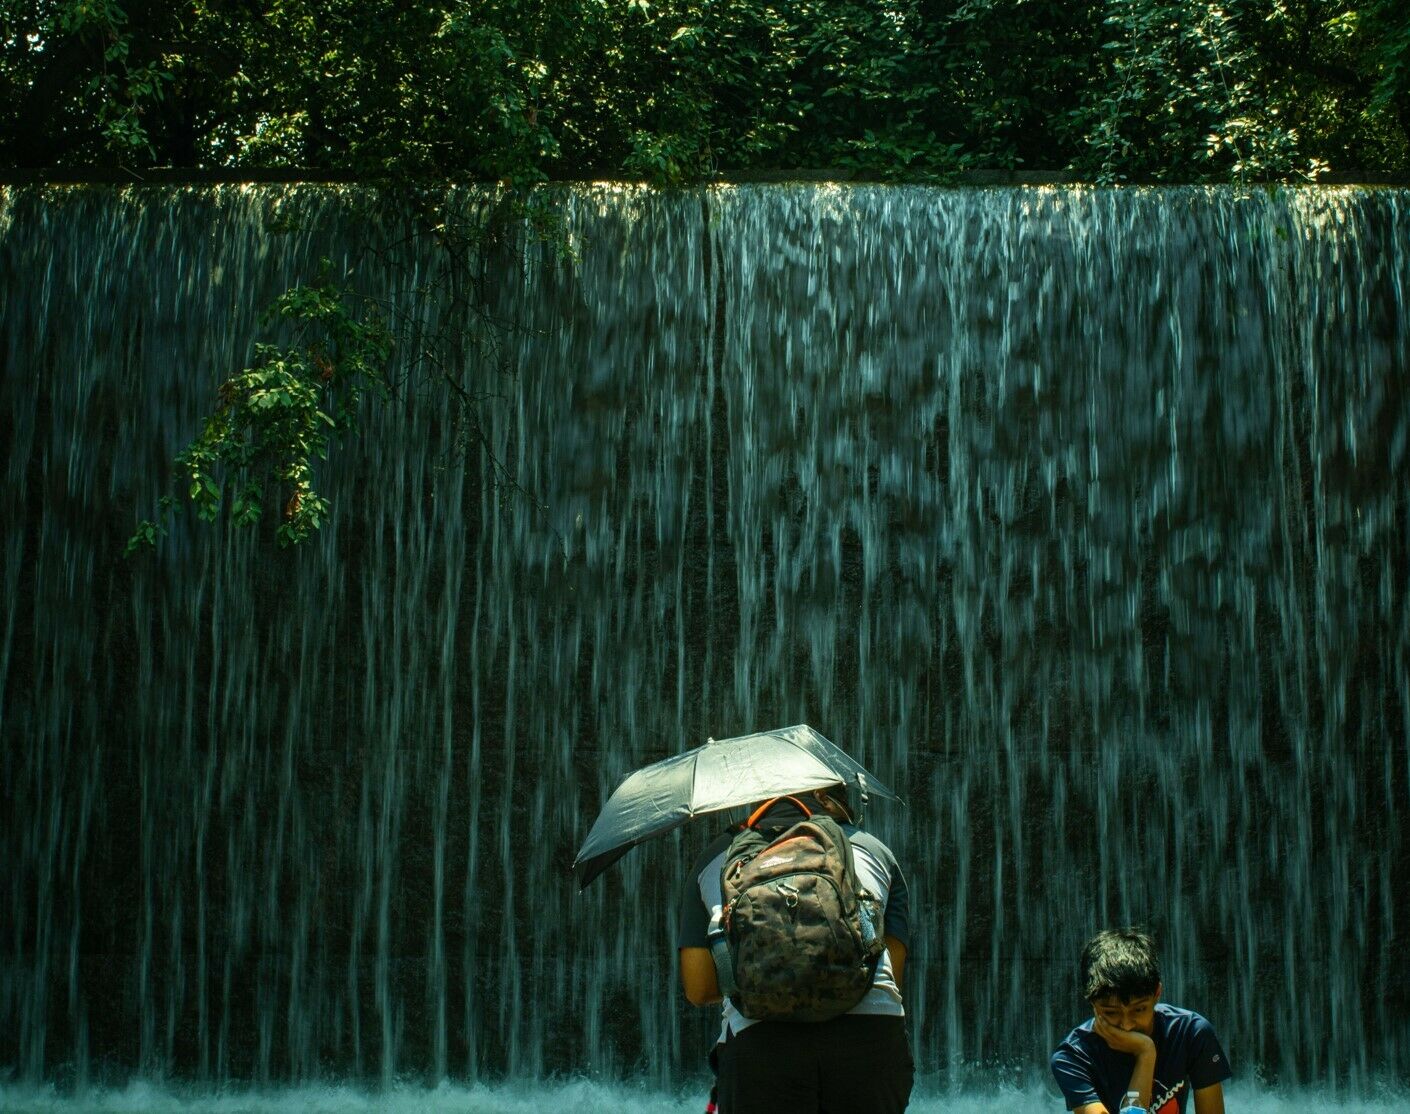 "Flash Flood" by Alex Rosello, taken at the FDR Memorial  